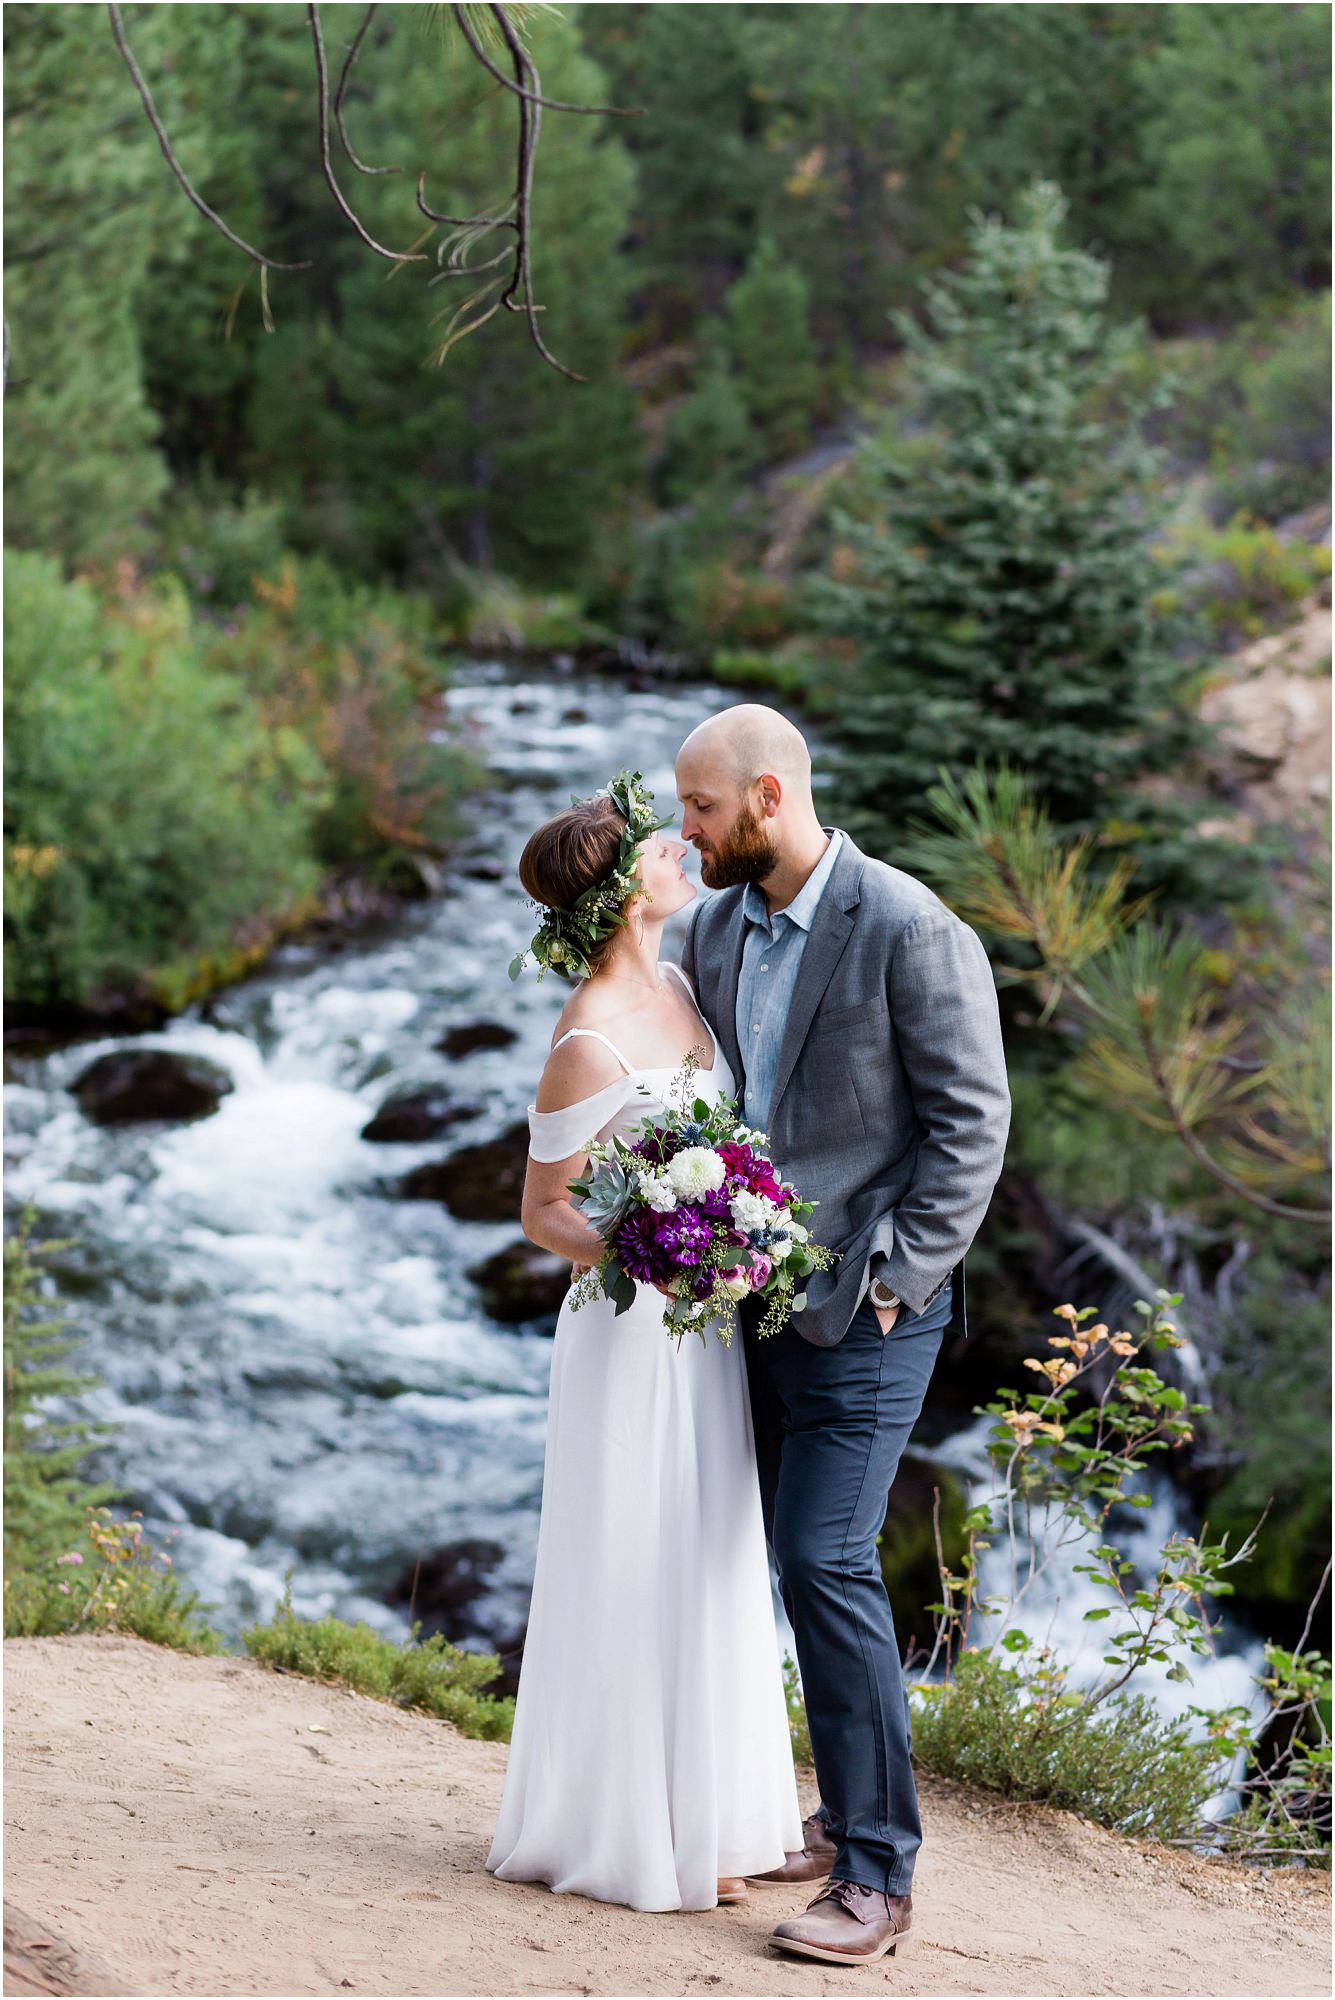 A gorgeous view of Tumalo Creek behind the bride wearing a white flutter sleeve dress and the groom is navy blue at their Tumalo Falls elopement near Bend, Oregon. | Erica Swantek Photography